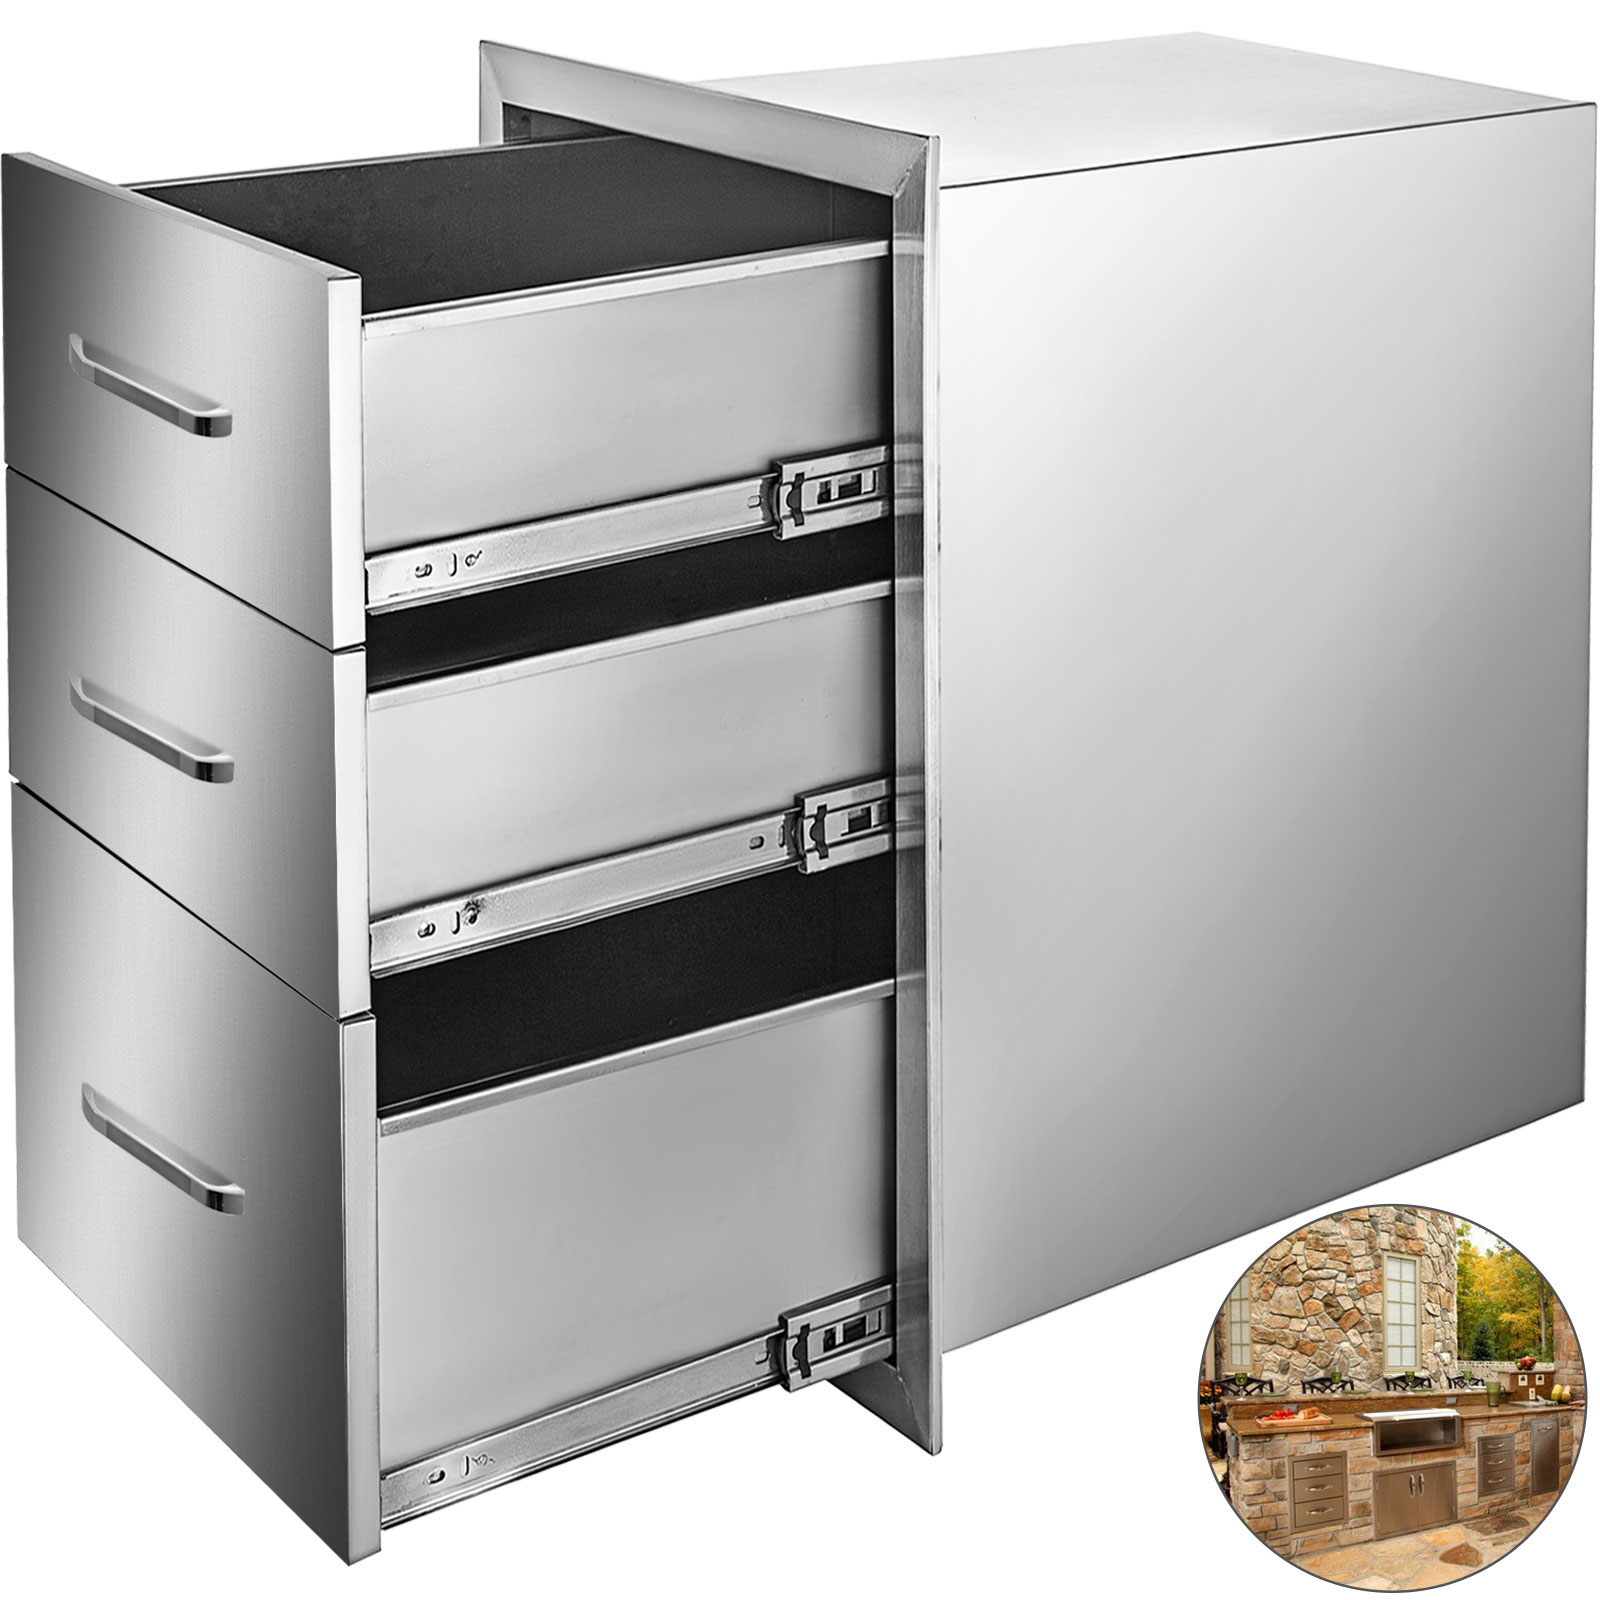 Details about   Outdoor Kitchen BBQ Island Components Stainless Steel Access Door And Drawer 